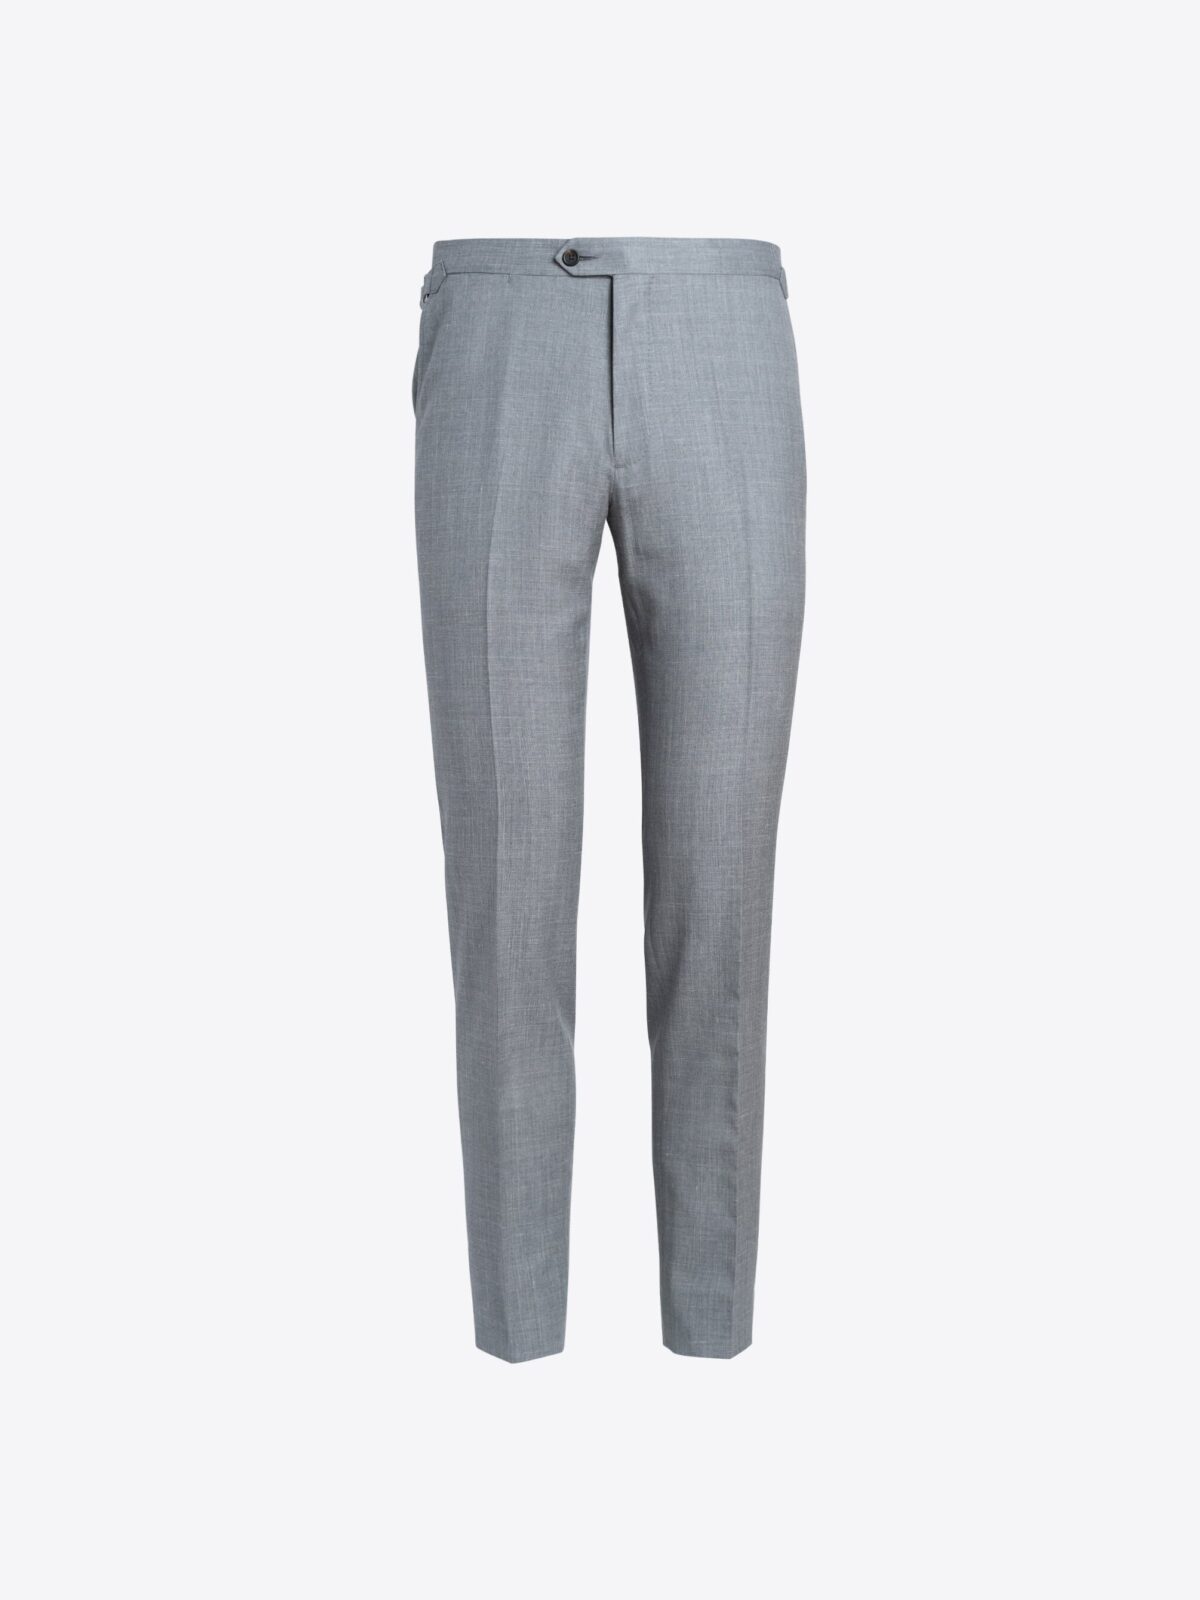 Light Grey Wool Stretch Dress Pant - Custom Fit Tailored Clothing